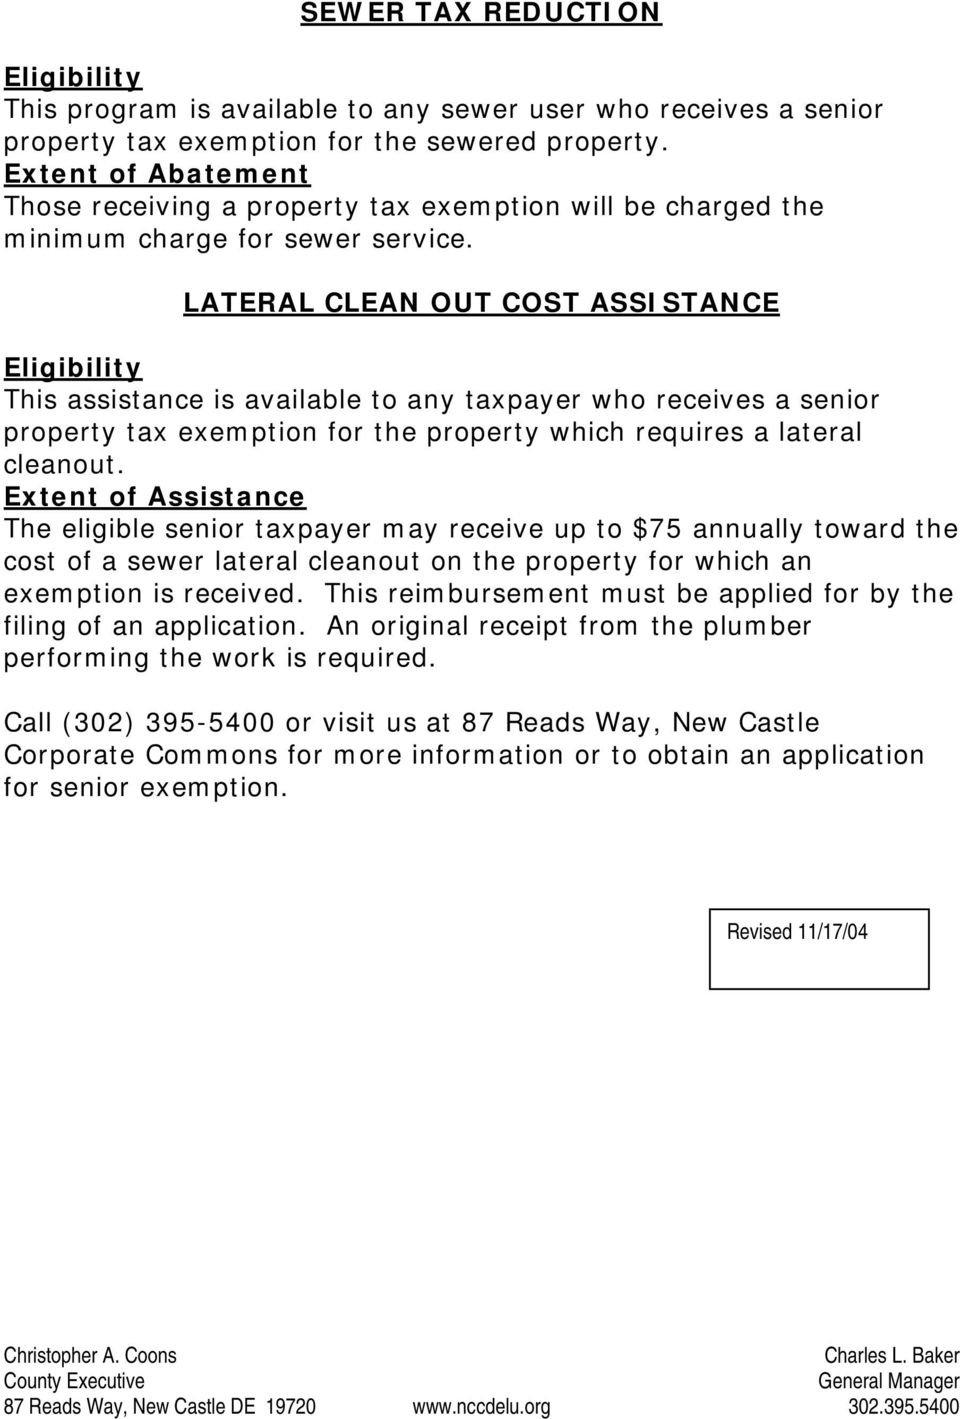 LATERAL CLEAN OUT COST ASSISTANCE This assistance is available to any taxpayer who receives a senior property tax exemption for the property which requires a lateral cleanout.